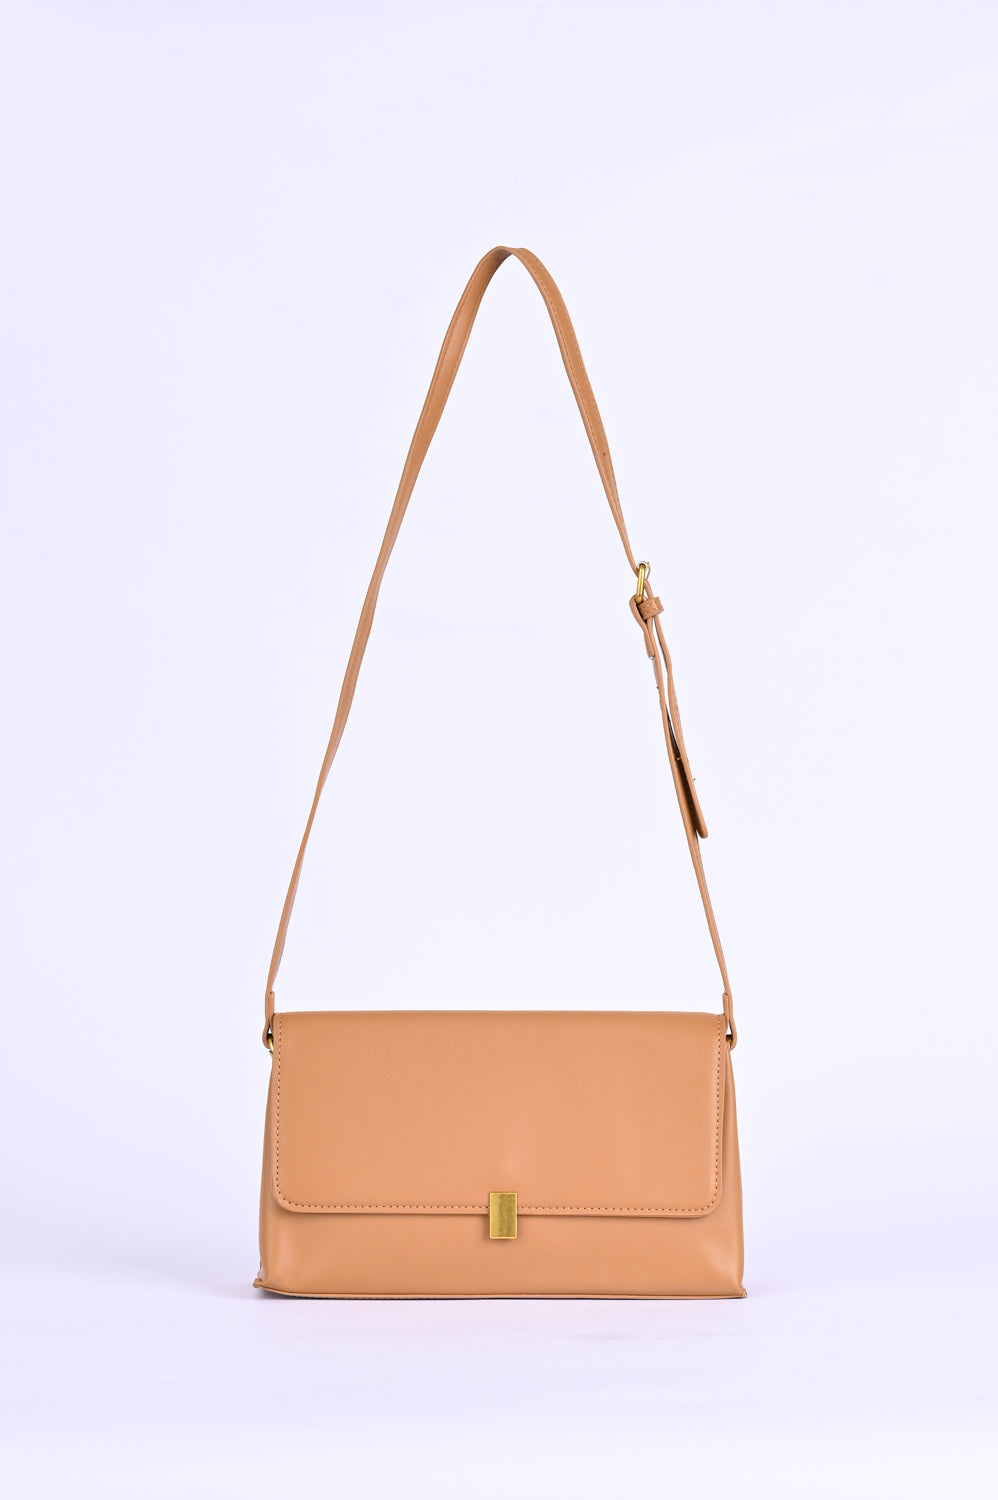 SATCHEL BAG WITH DOUBLE STRAPS